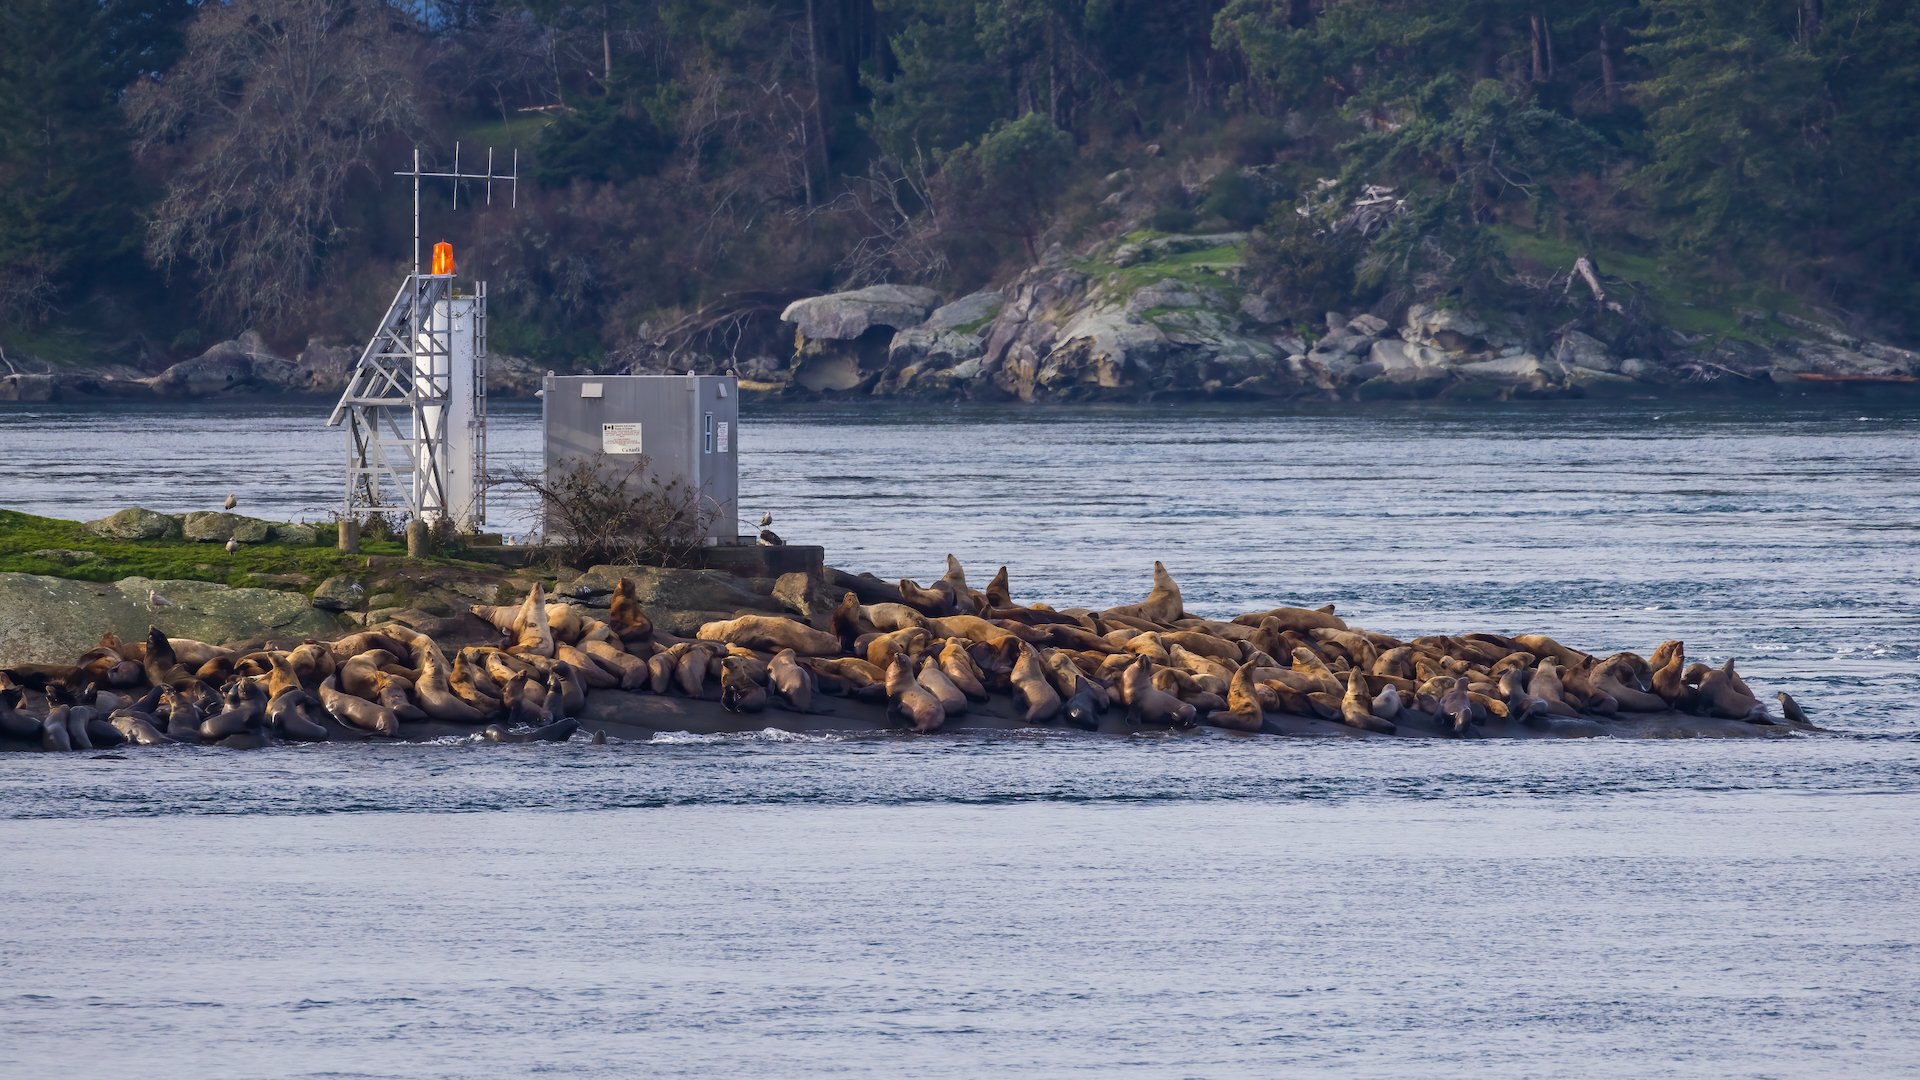  A little ways up the channel, you could see the main part of the sea lion colony. 